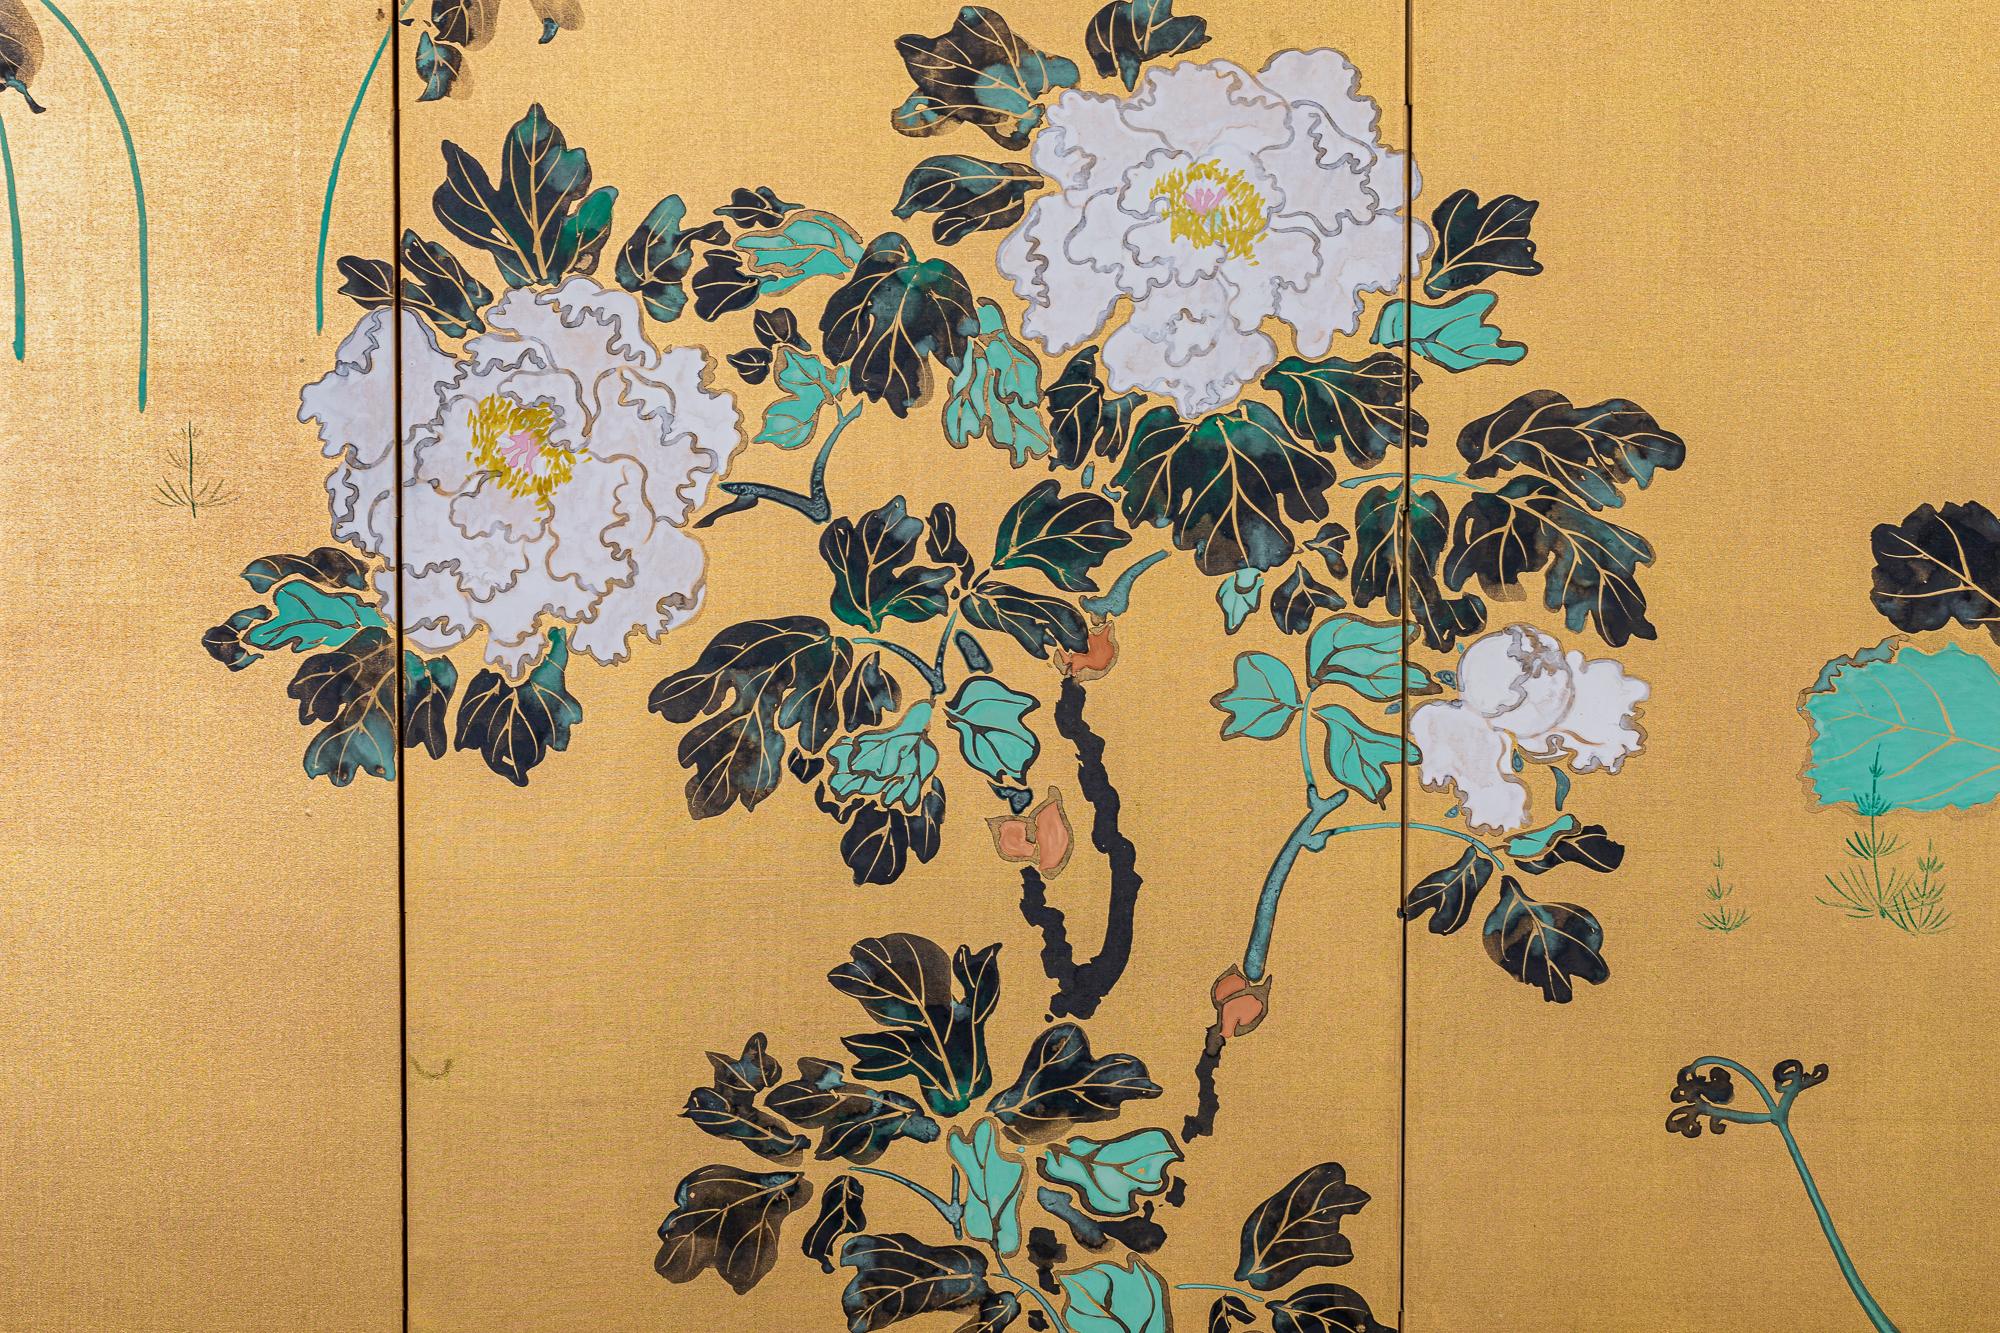 Rimpa floral scene. Pigment on gilded silk, signature and seal read: Hattori Shunyo. Bold colors and strong design elements combined with the trademark tarashikomi (diluted elements created when water is applied to the surface before or after